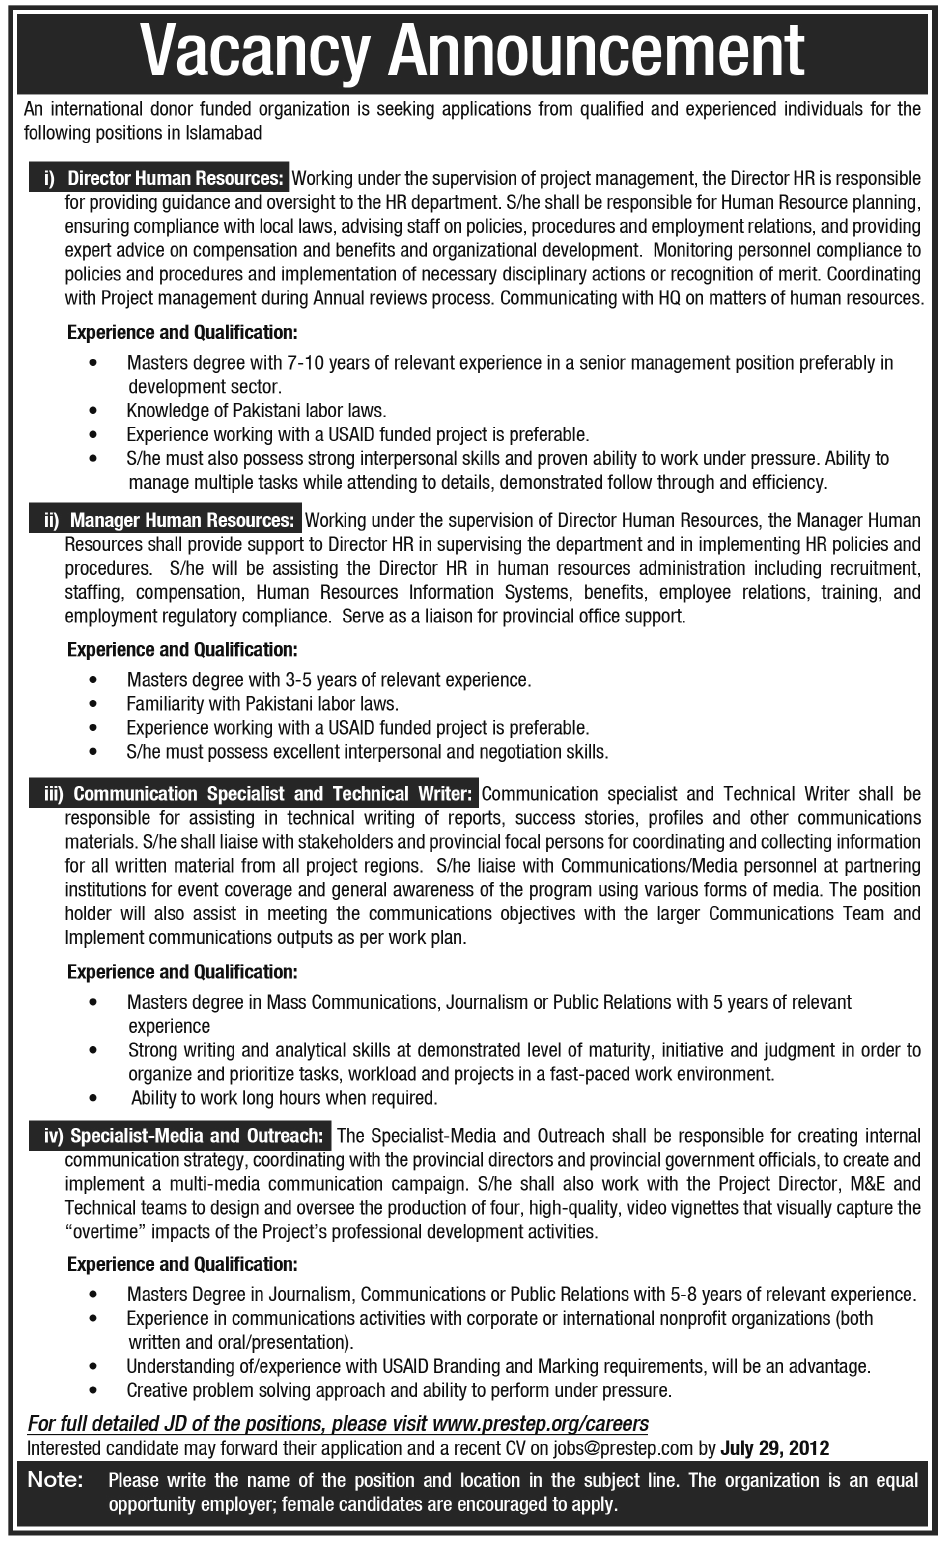 An NGO Requires HR Management Staff and Media Specialist (NGO Job)